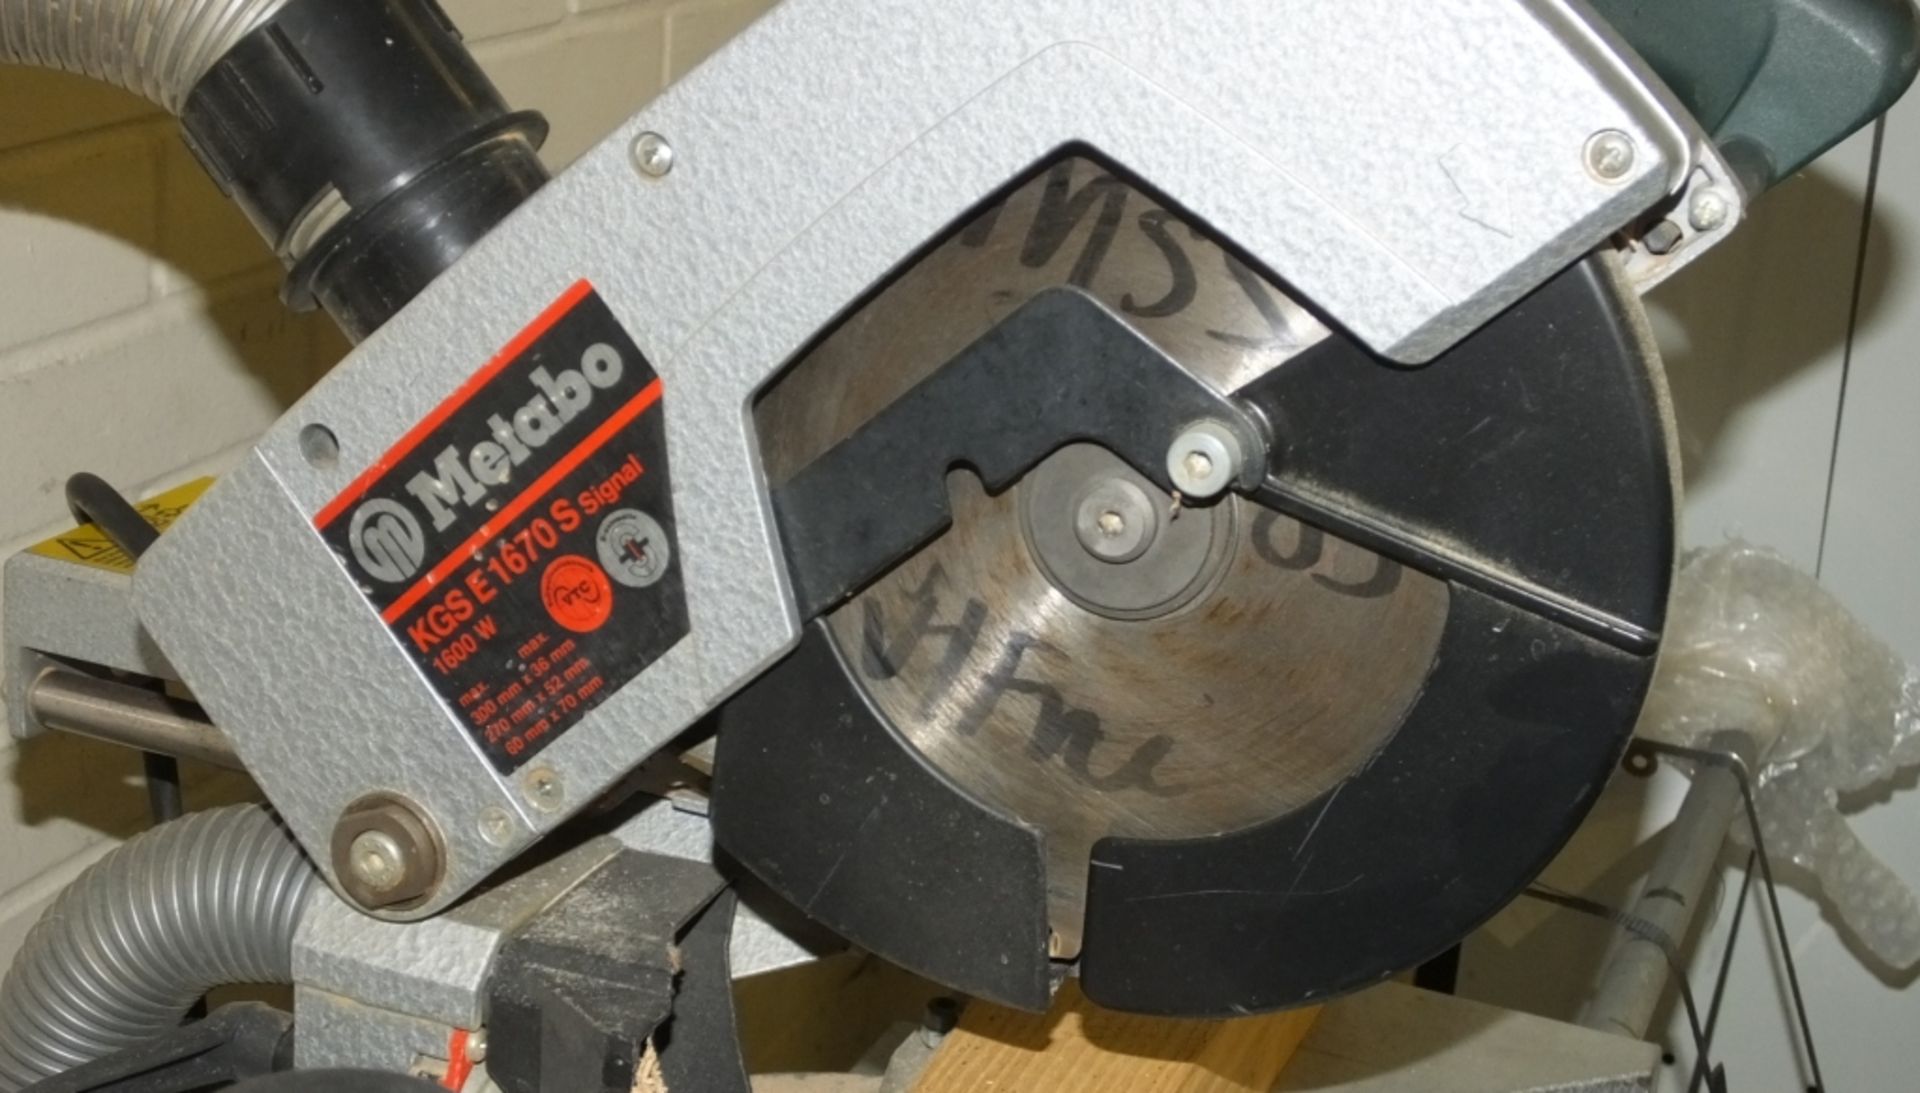 Metabo KGS E 1670S Signal Mitre Saw - Image 3 of 4